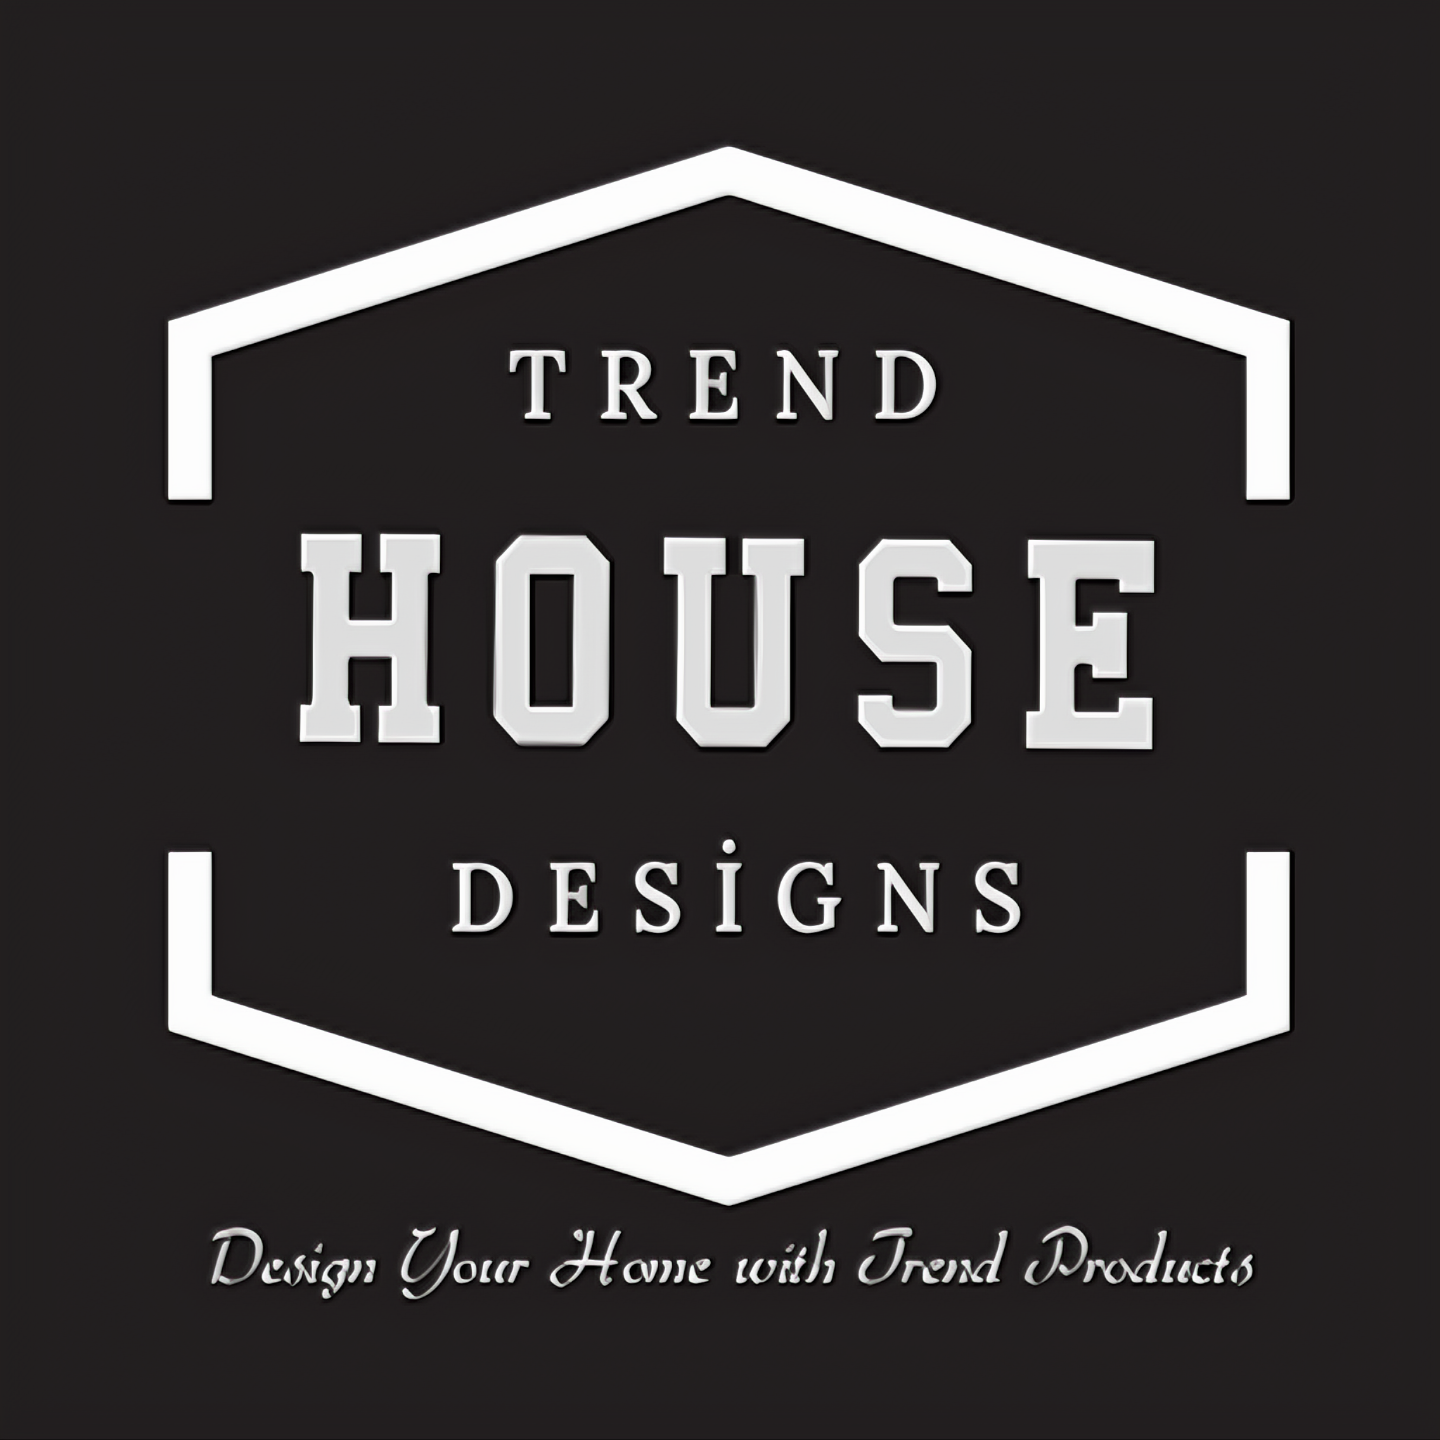 Trend House Designs